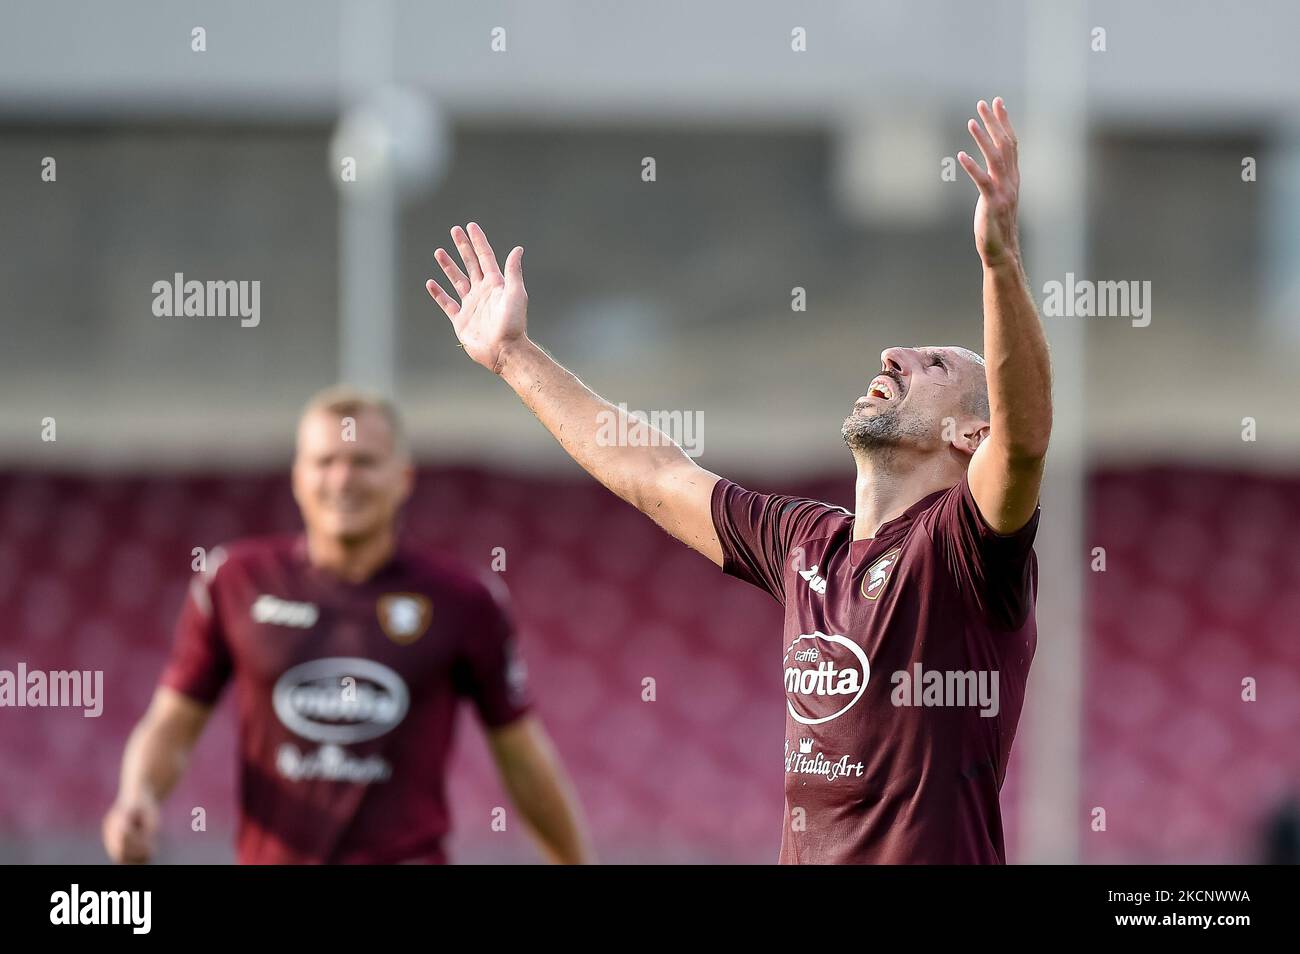 Franck Ribery of US Salernitana 1919 celebrates for the first victory with his new team during the Serie A match between US Salernitana 1919 and Genoa CFC at Stadio Arechi, Salerno, Italy on 2 October 2021. (Photo by Giuseppe Maffia/NurPhoto) Stock Photo